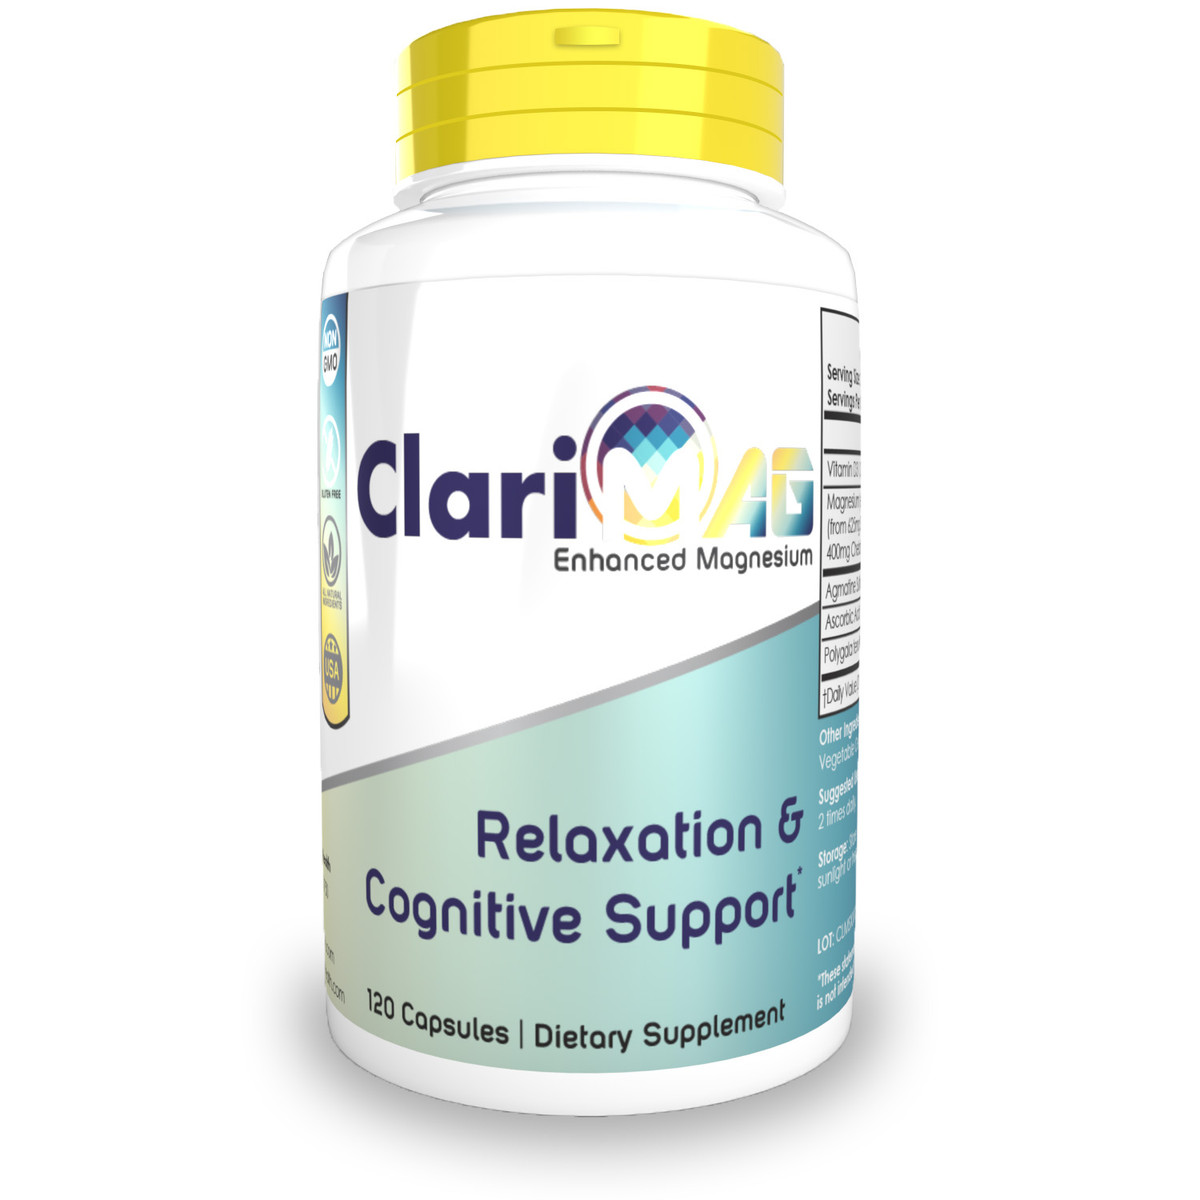 ClariMAG Capsules | Enhanced Magnesium | Relaxation & Cognitive Support